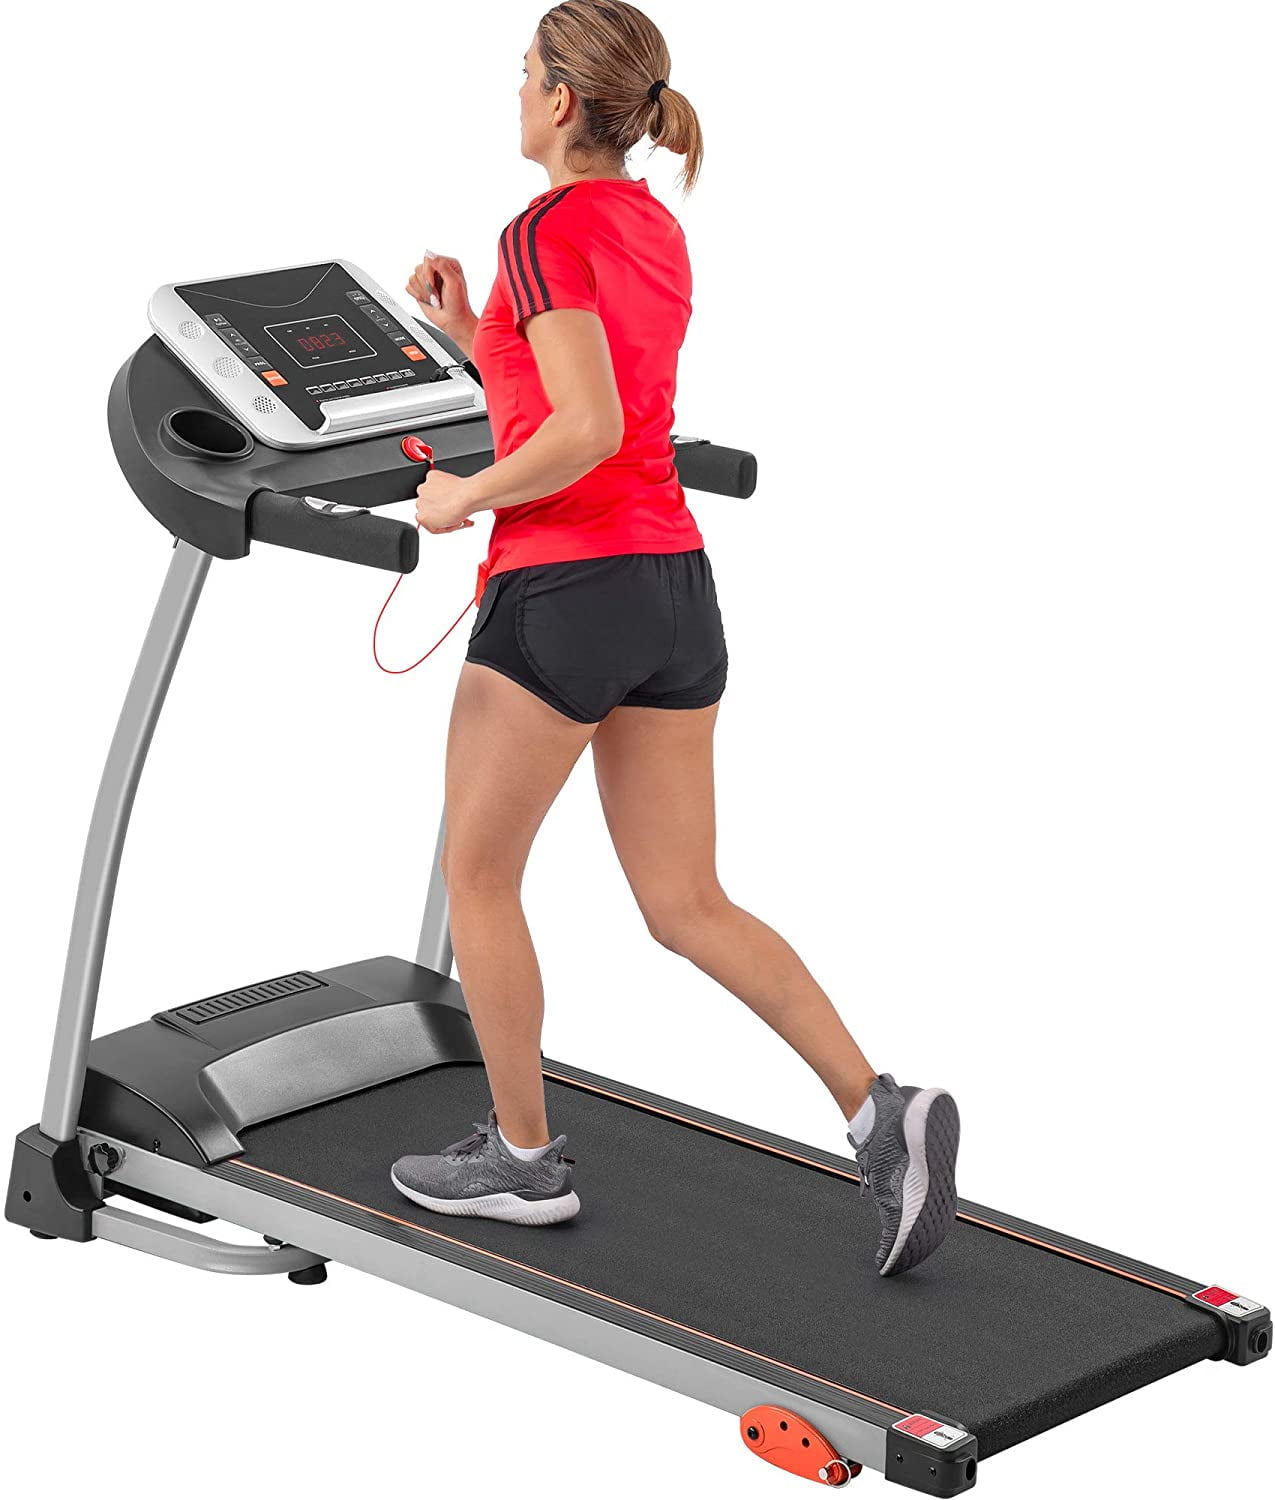 Treadmill Mechanical Adjustable Folding 265 LBS Weight Capacity with LCD Display，l Walking Running Machine For Home,Office & Gym 